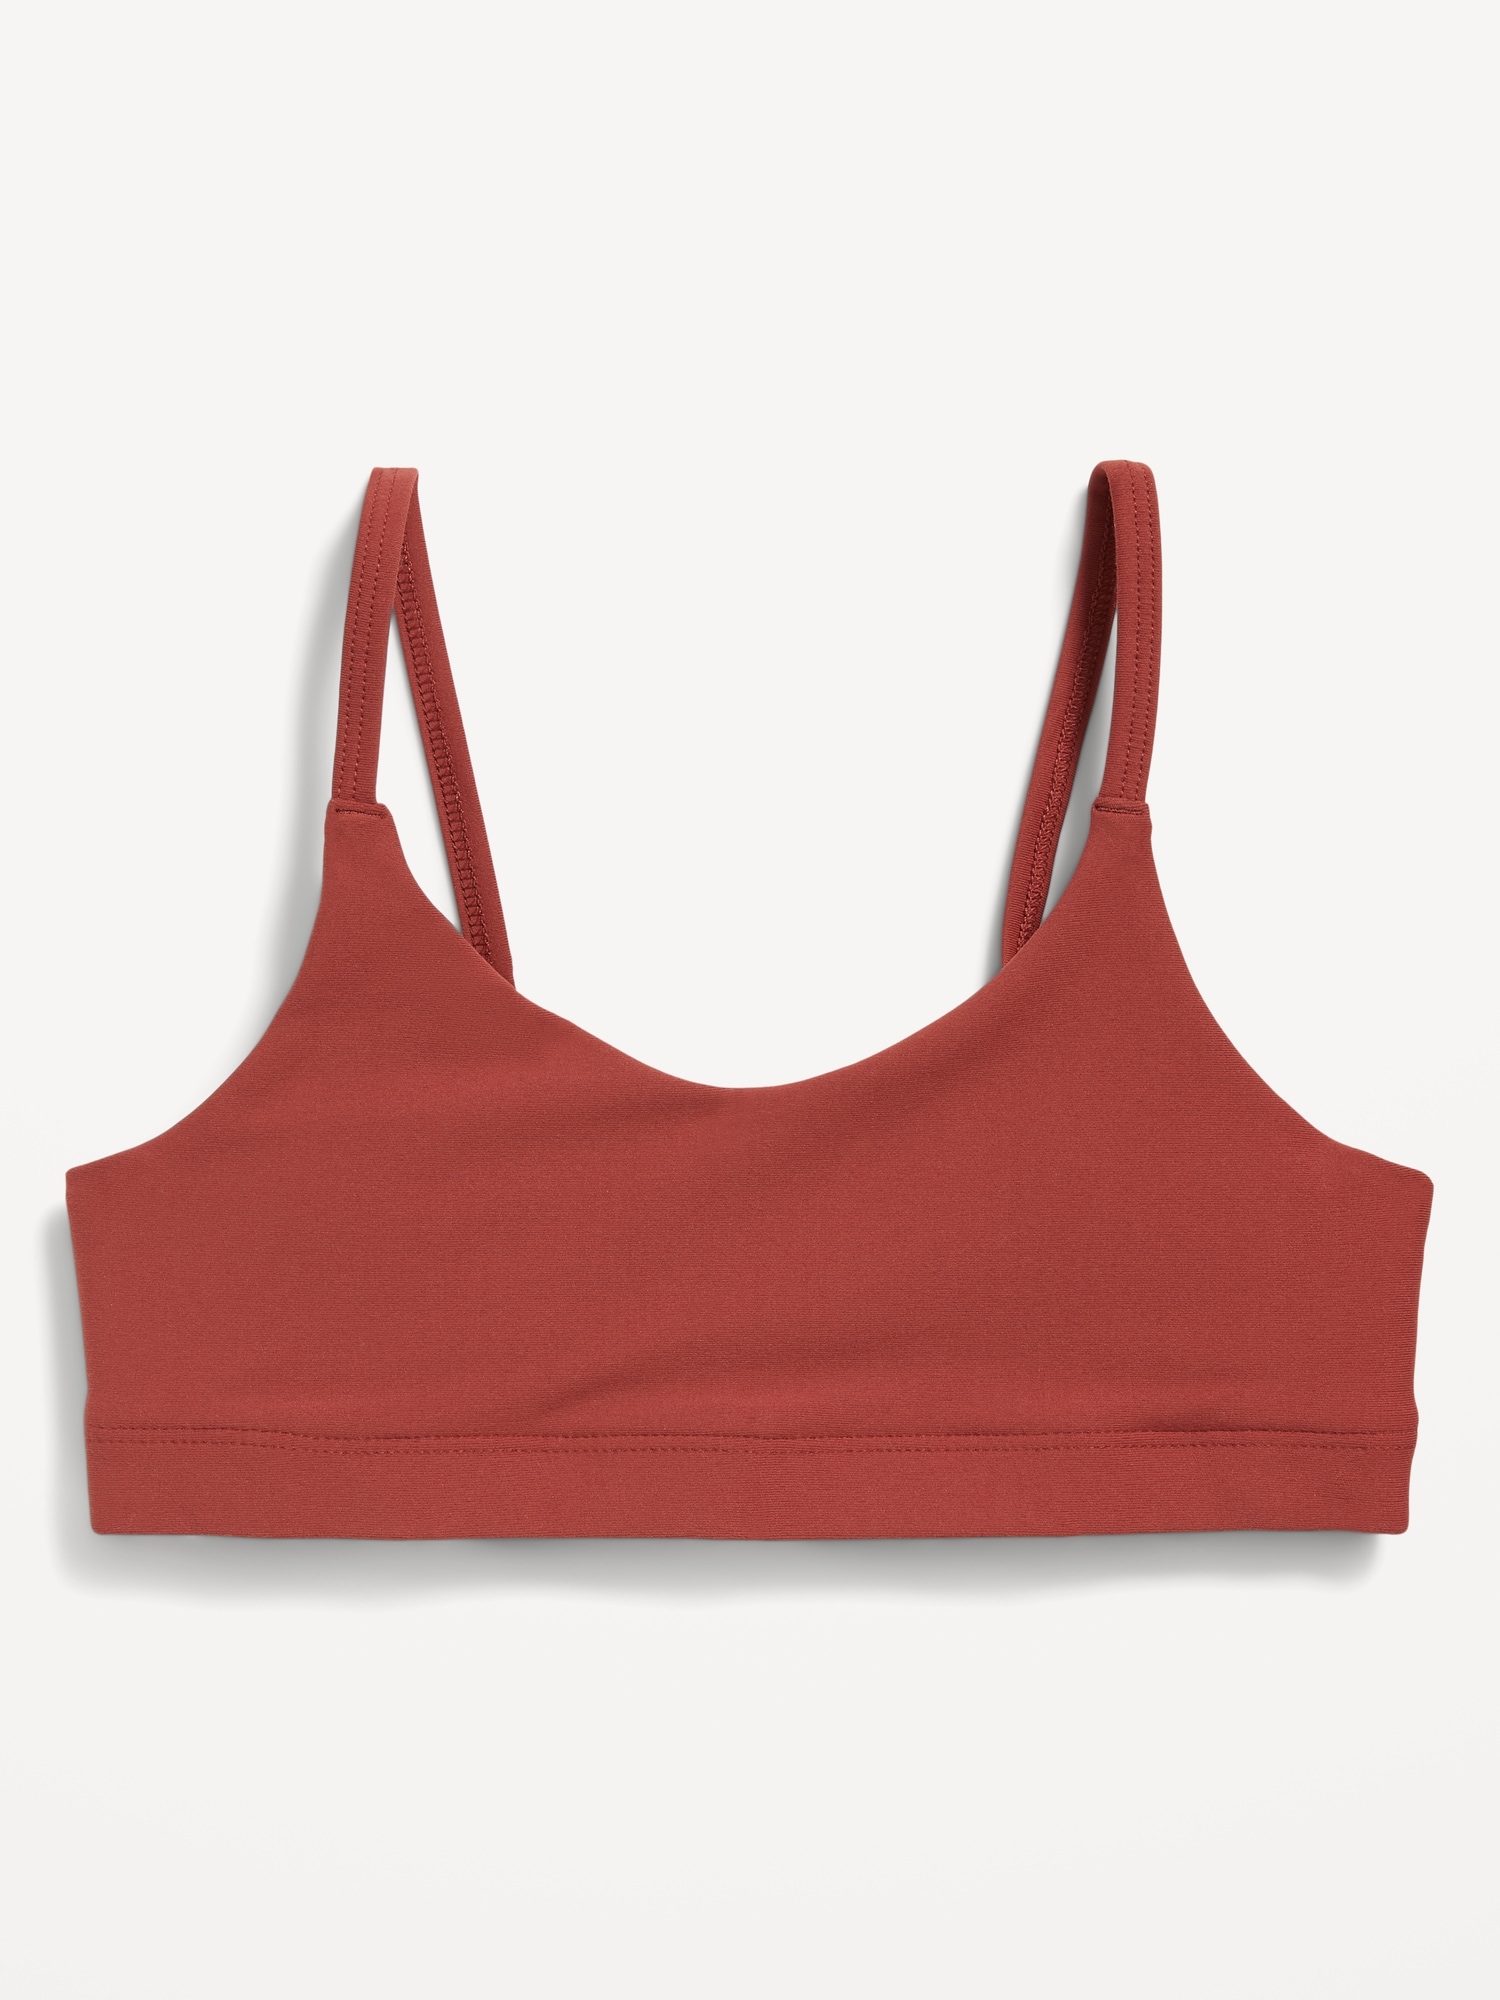 Old Navy PowerSoft Everyday Convertible-Strap Bra for Girls red. 1